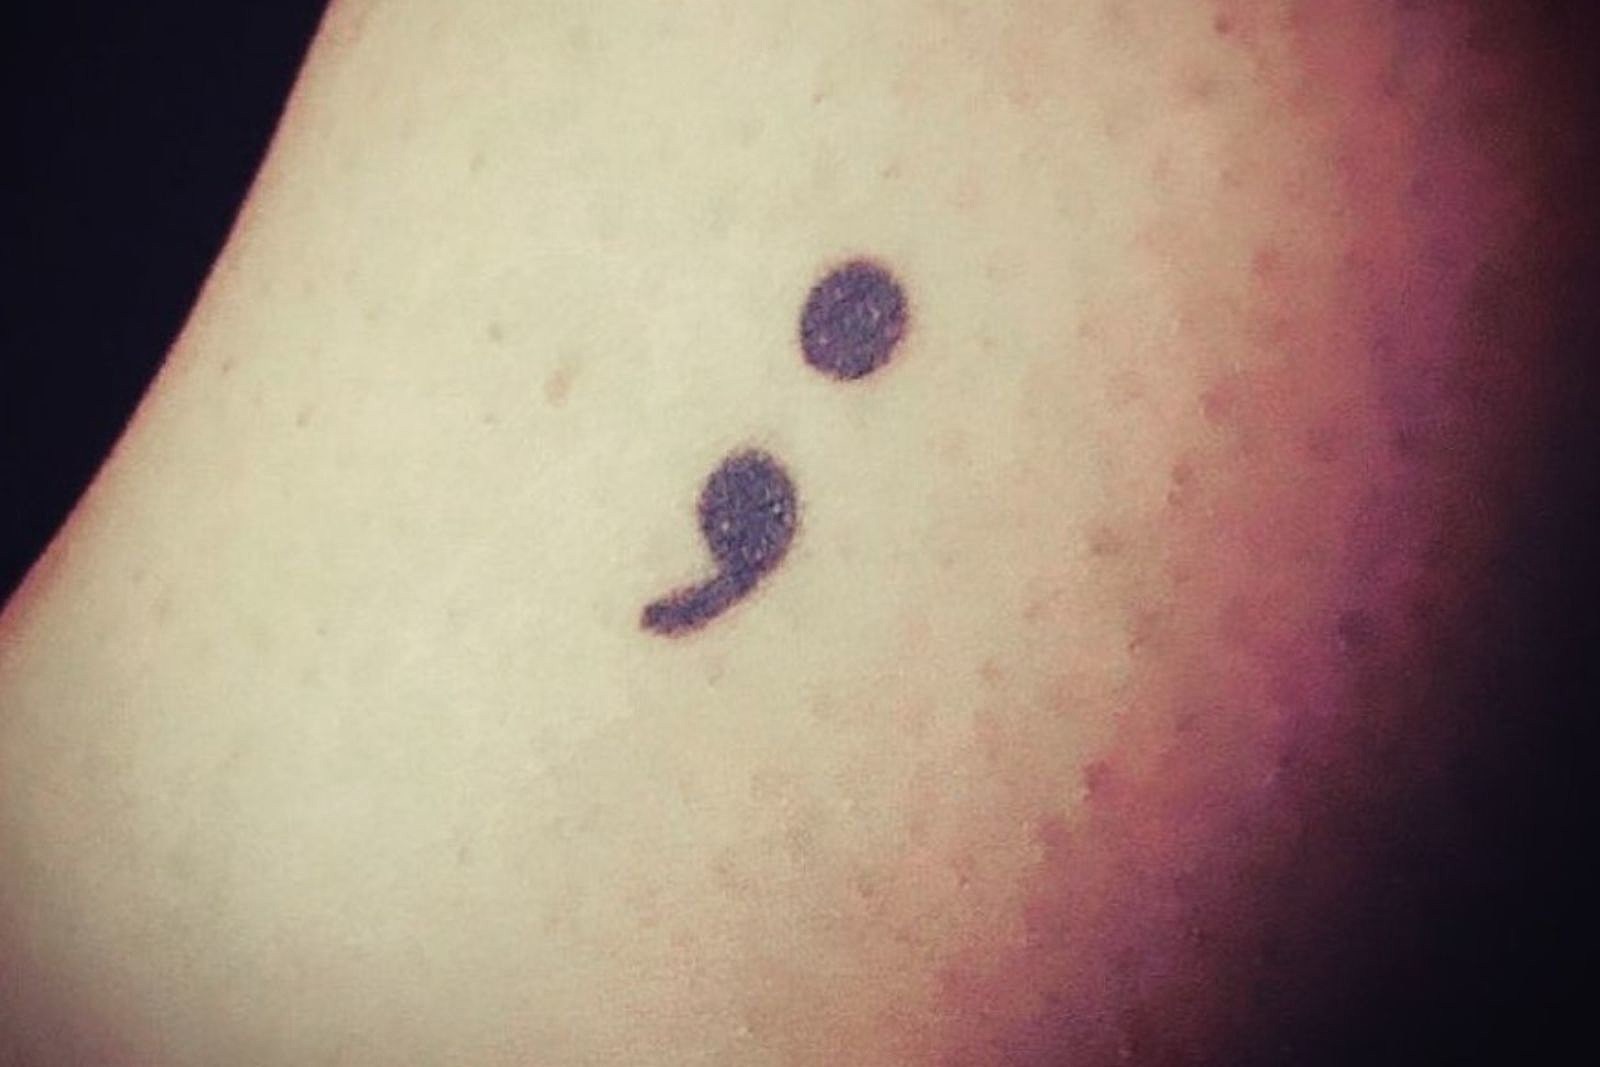 What Is The Semicolon Tattoo Project? - YouTube